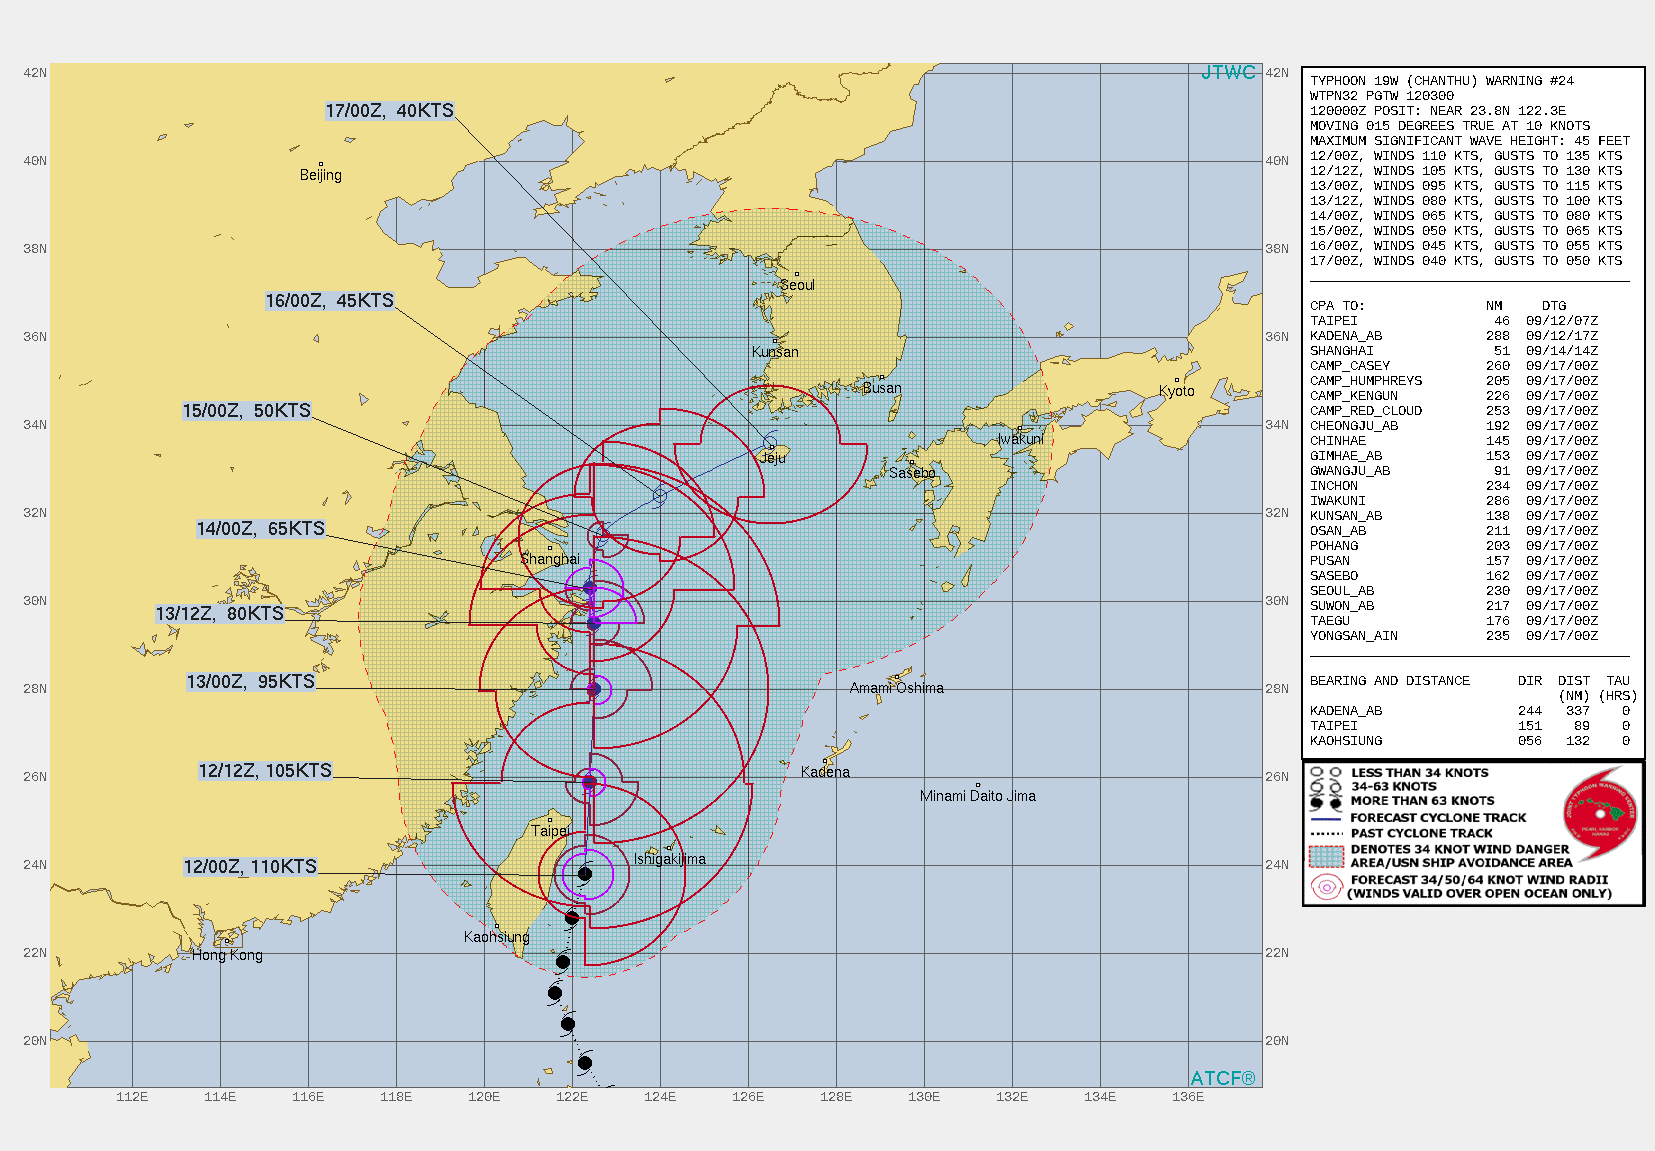 TY 19W(CHANTHU). WARNING 24 ISSUED AT 12/03UTC.SIGNIFICANT FORECAST CHANGES: THE SYSTEM IS NOW EXPECTED TO BEGIN EXTRA-TROPICAL TRANSITION AT 120H NEAR CHEJU ISLAND.  FORECAST DISCUSSION: TY 19W WILL TRACK POLEWARD ALONG THE WESTERN PERIPHERY OF THE SUBTROPICAL RIDGE THROUGH 72H. THE SYSTEM SHOULD STEADILY WEAKEN AS IT INTERACTS WITH TAIWAN AND UPPER-LEVEL DIVERGENCE DECREASES AS THE SYSTEM BEGINS TO INTERACT WITH AN UPPER-LEVEL SUBTROPICAL TROUGH EXPECTED TO DEEPEN OVER EASTERN CHINA OVER THE NEXT TWO DAYS. IN THE EXTENDED PERIOD, TY 19W IS FORECAST TO TRACK EAST-NORTHEASTWARD WITHIN WESTERLY FLOW AND WILL WEAKEN TO TS STRENGTH (40 KNOTS) BY 120H. NUMERICAL MODEL GUIDANCE INDICATES A FAIRLY ATYPICAL MIDLATITUDE PATTERN WITH WEAK TO MODERATE SUBTROPICAL WESTERLIES AND THE FRONTAL ZONE TO THE NORTH OVER THE KOREAN PENINSULA, THEREFORE, EXTRATROPICAL TRANSITION IS NOT EXPECTED UNTIL 120H WHEN THE SYSTEM FIRST BEGINS TO INTERACT WITH THE BAROCLINIC ZONE. ADDITIONALLY, TRACK SPEEDS SHOULD BE UNUSUALLY SLOW THROUGH 120H.